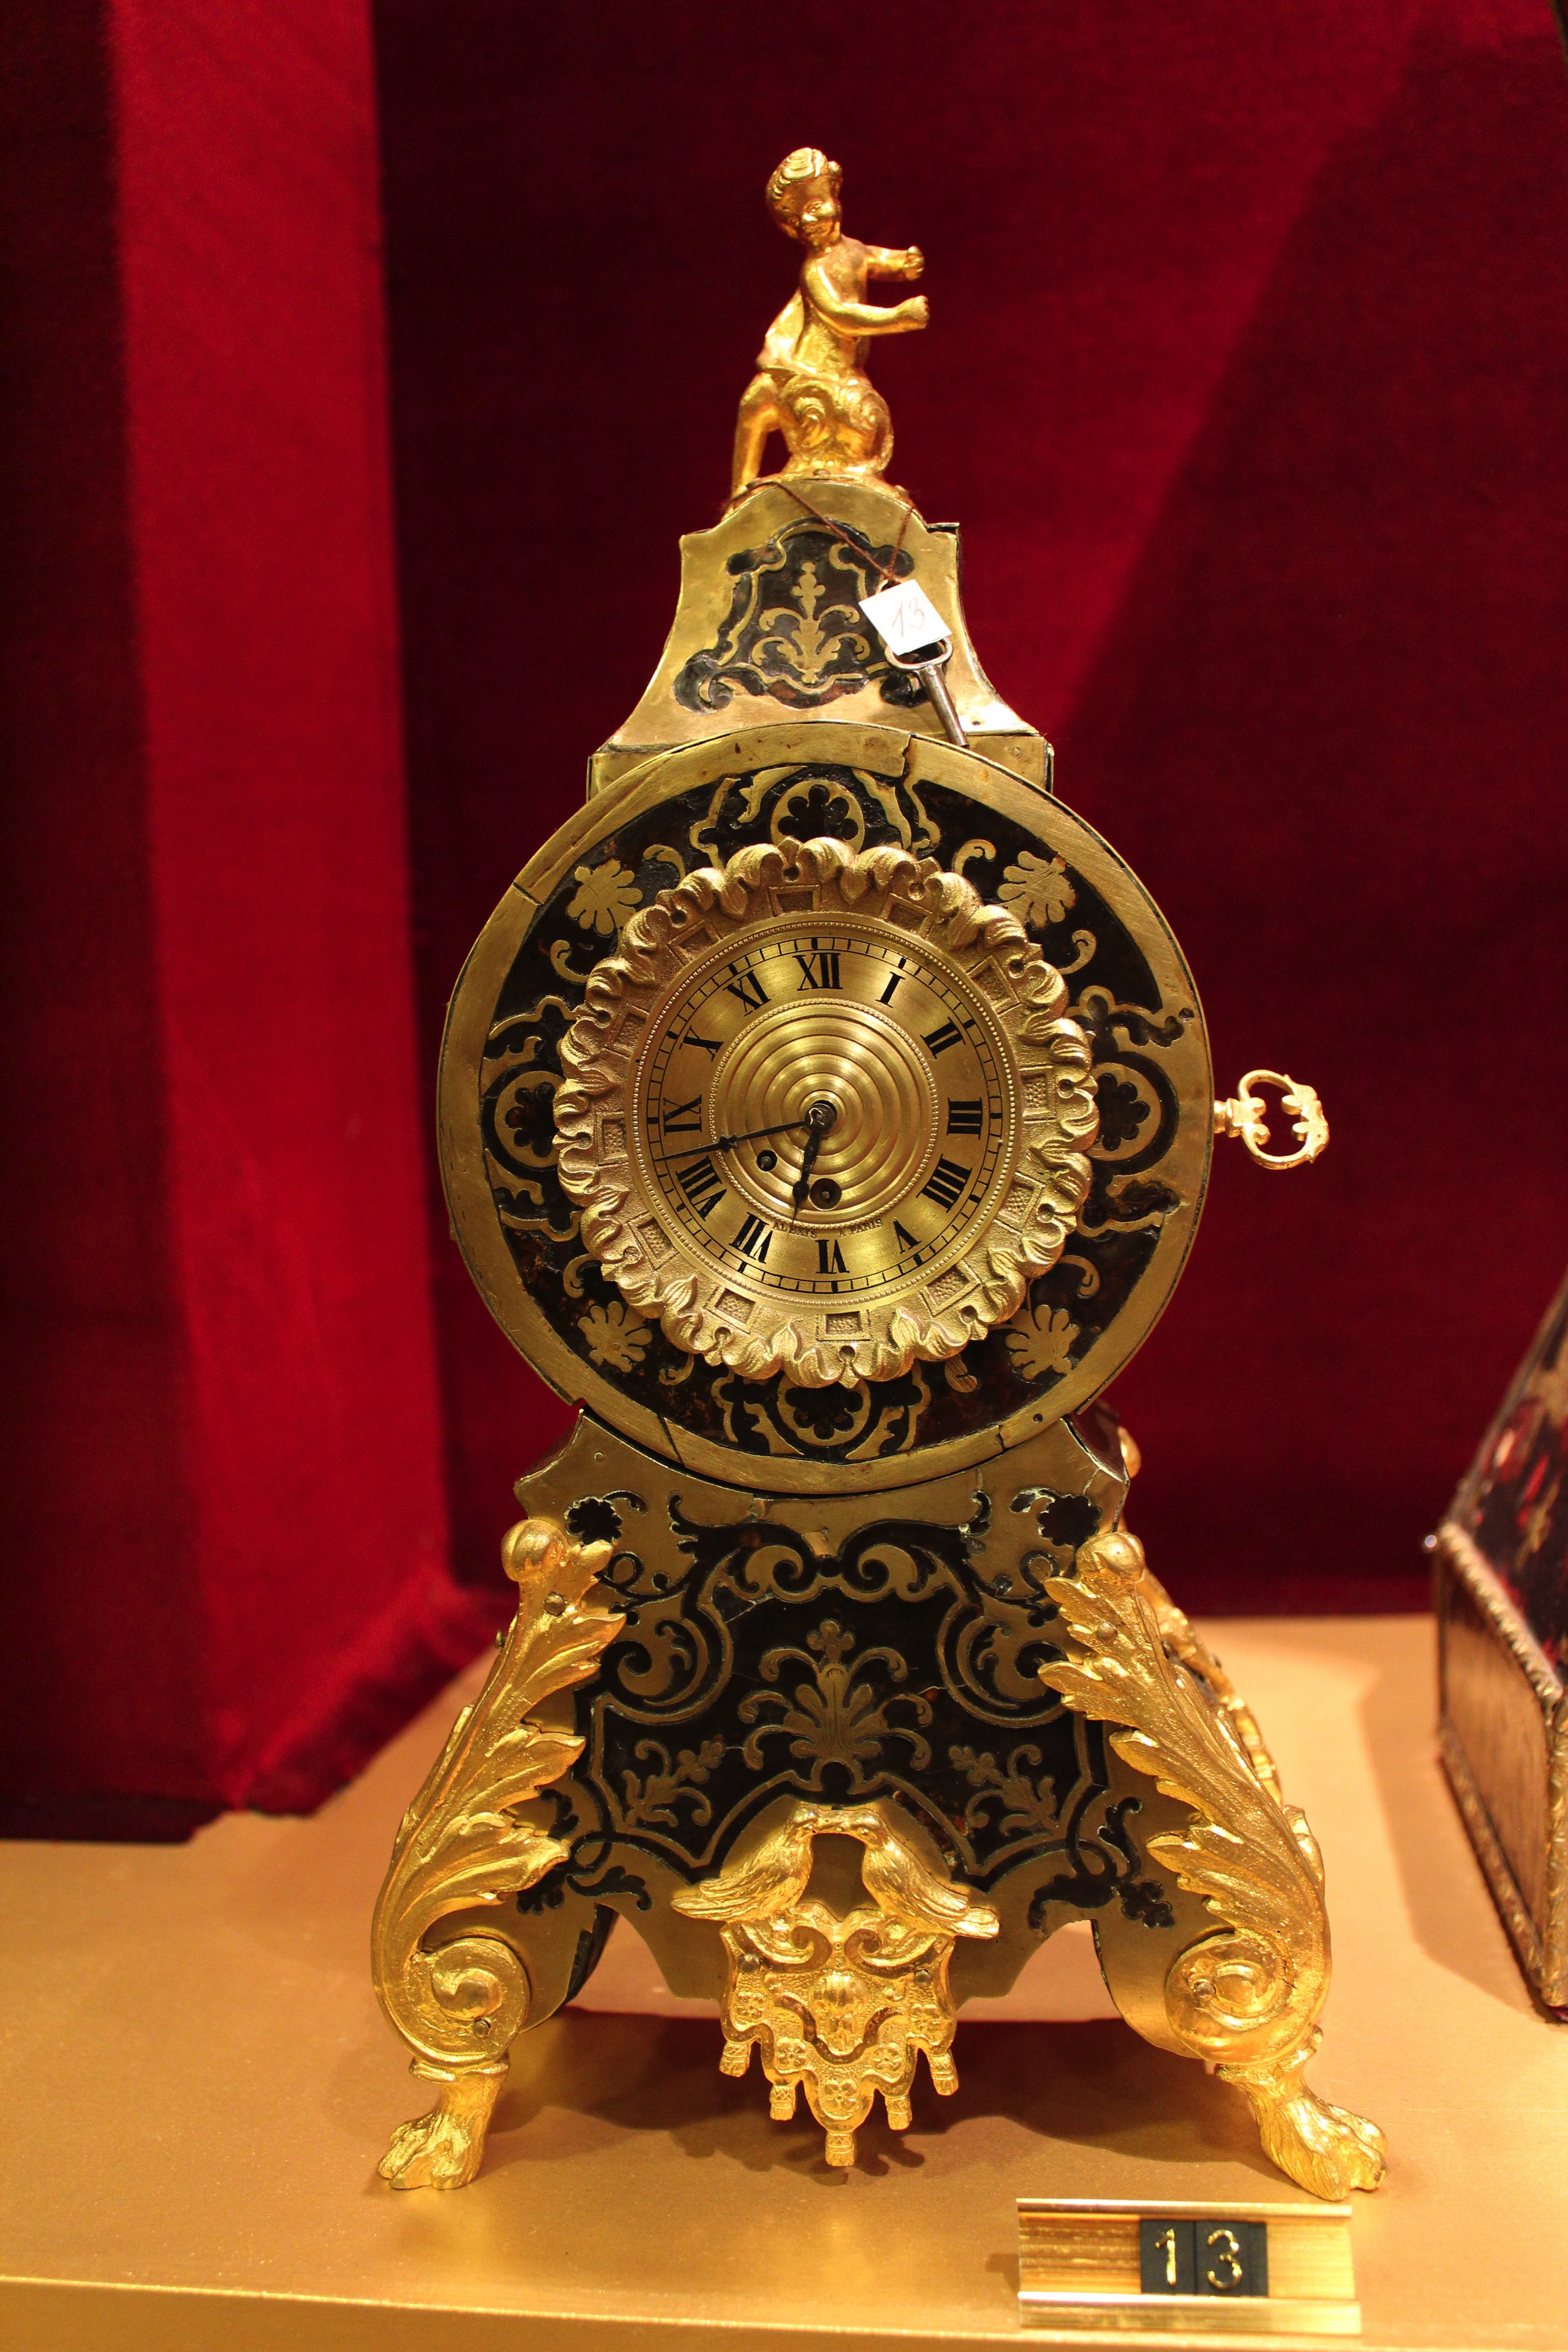 Small Size French Boulle Style Clocks